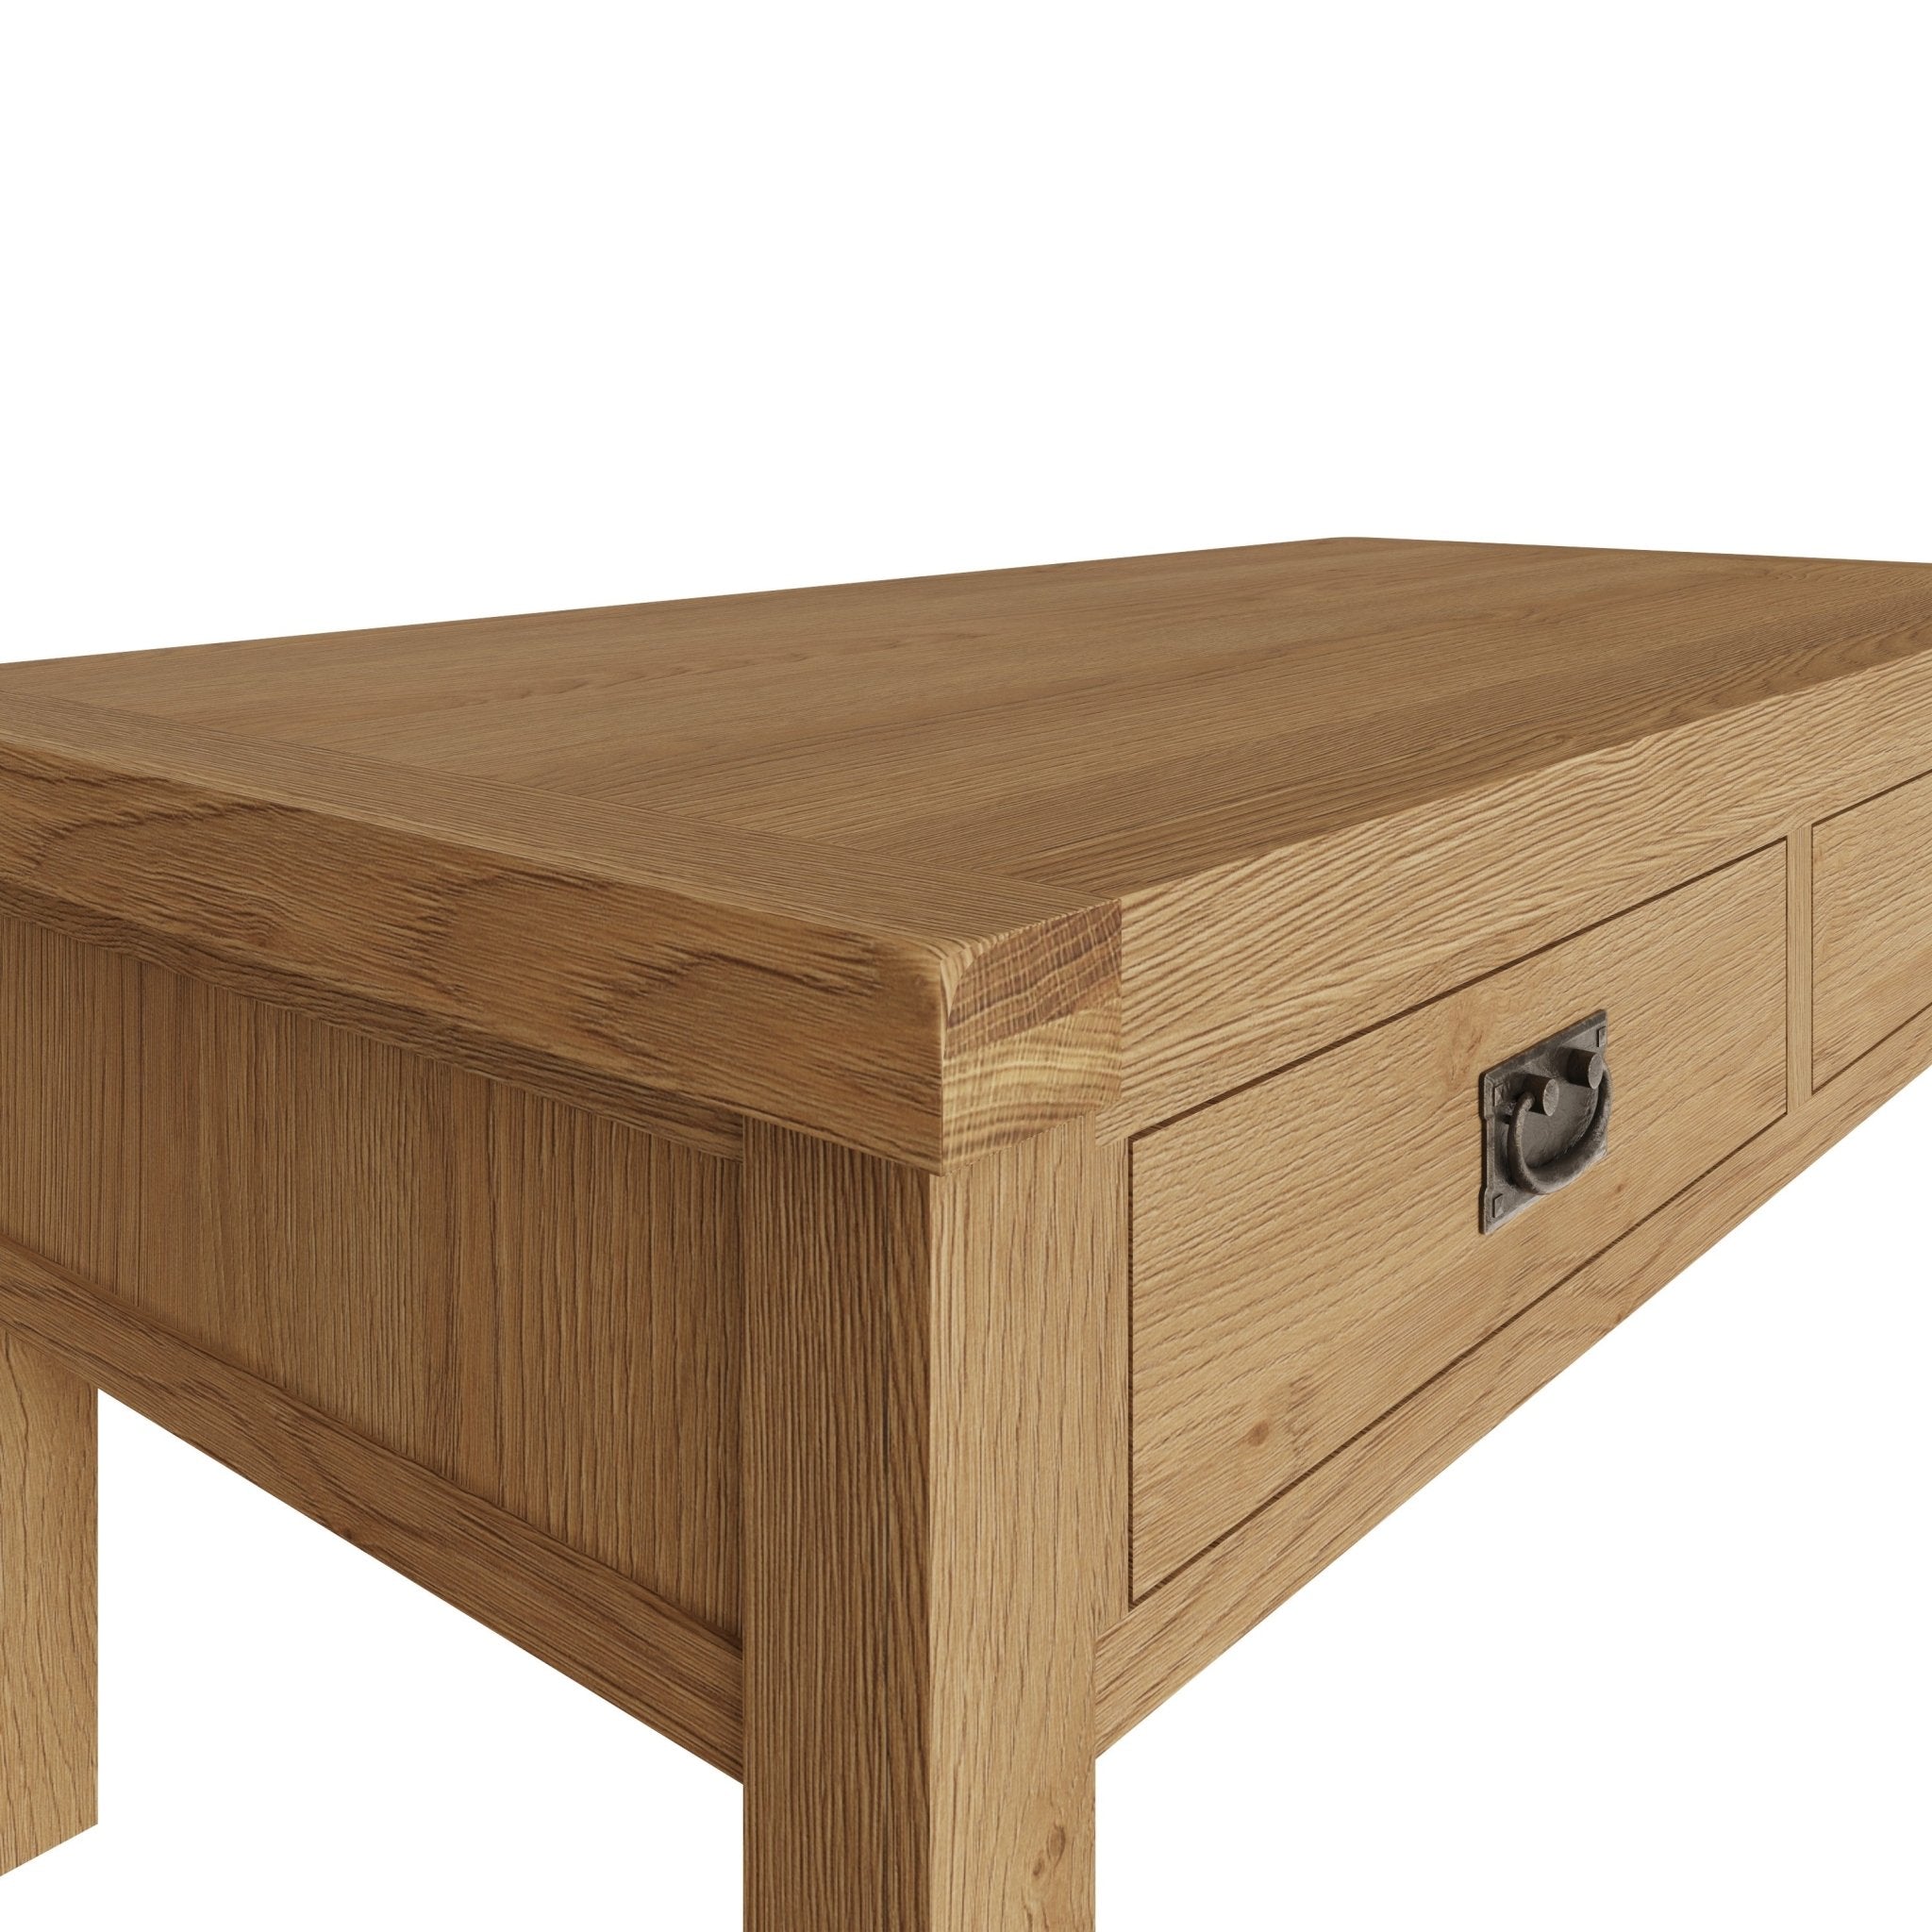 Kirdford Oak Coffee Table with 2 Drawers - Duck Barn Interiors